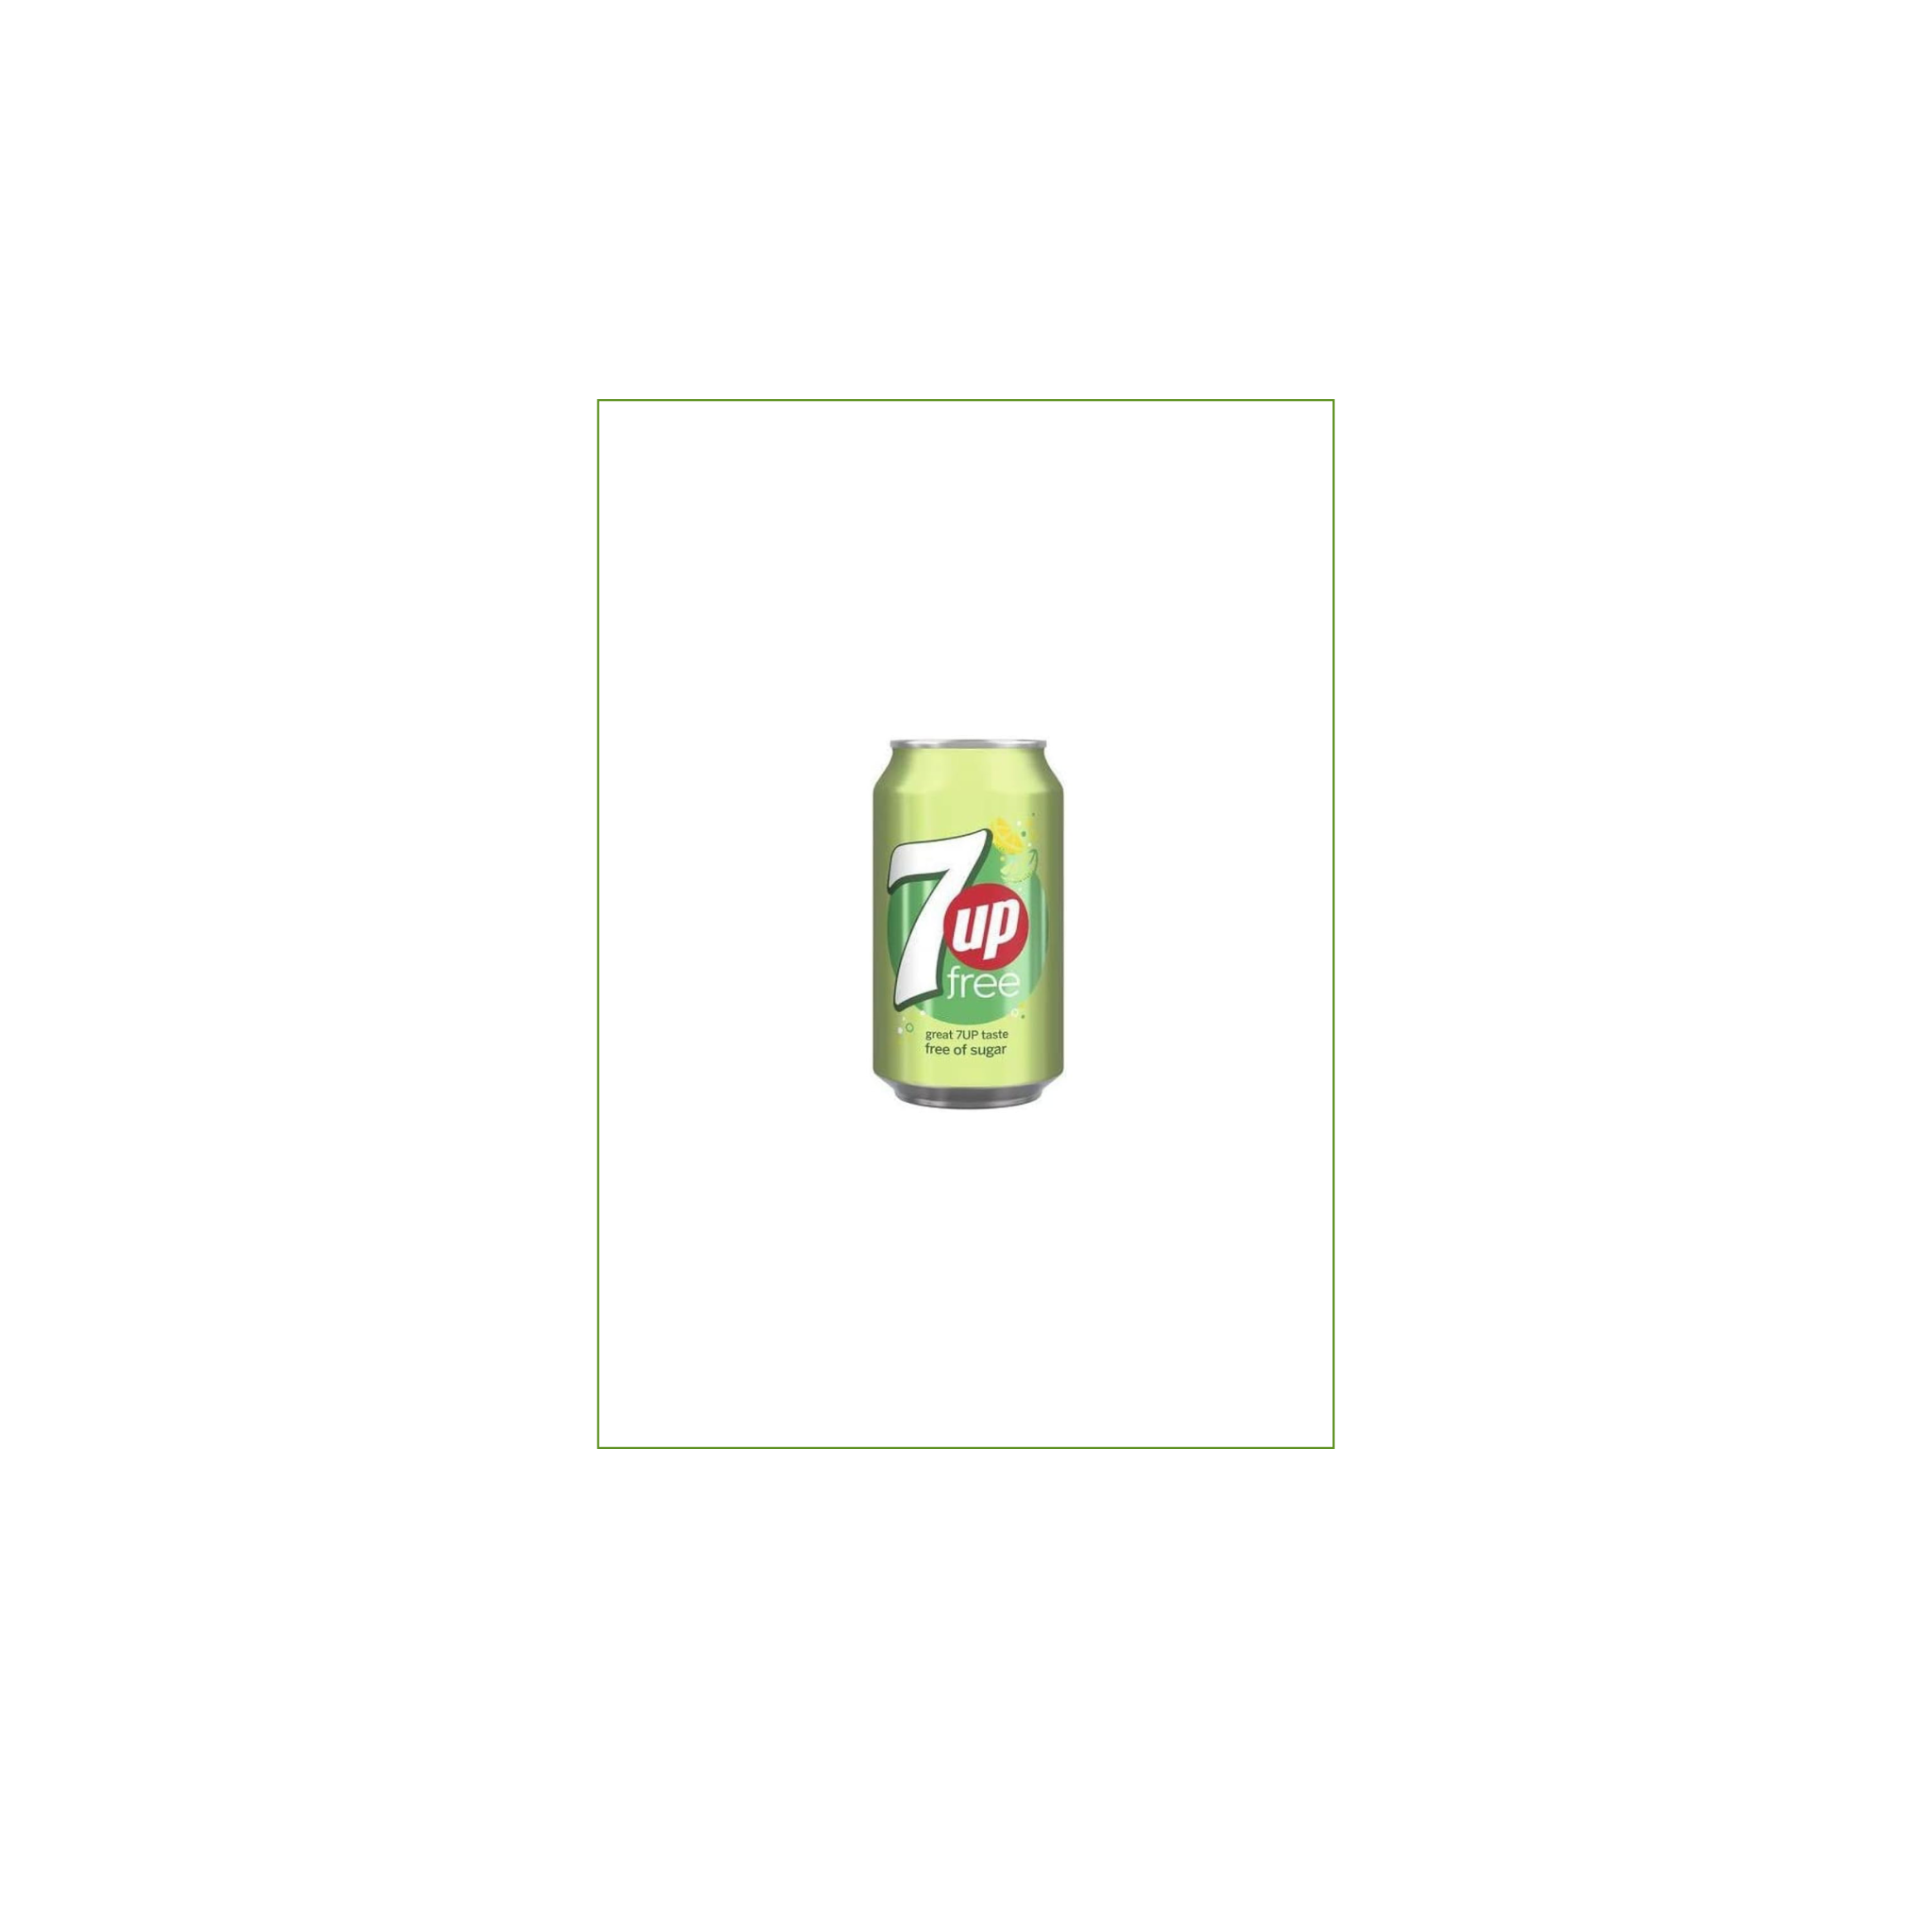 7up1_2048x2048px.png